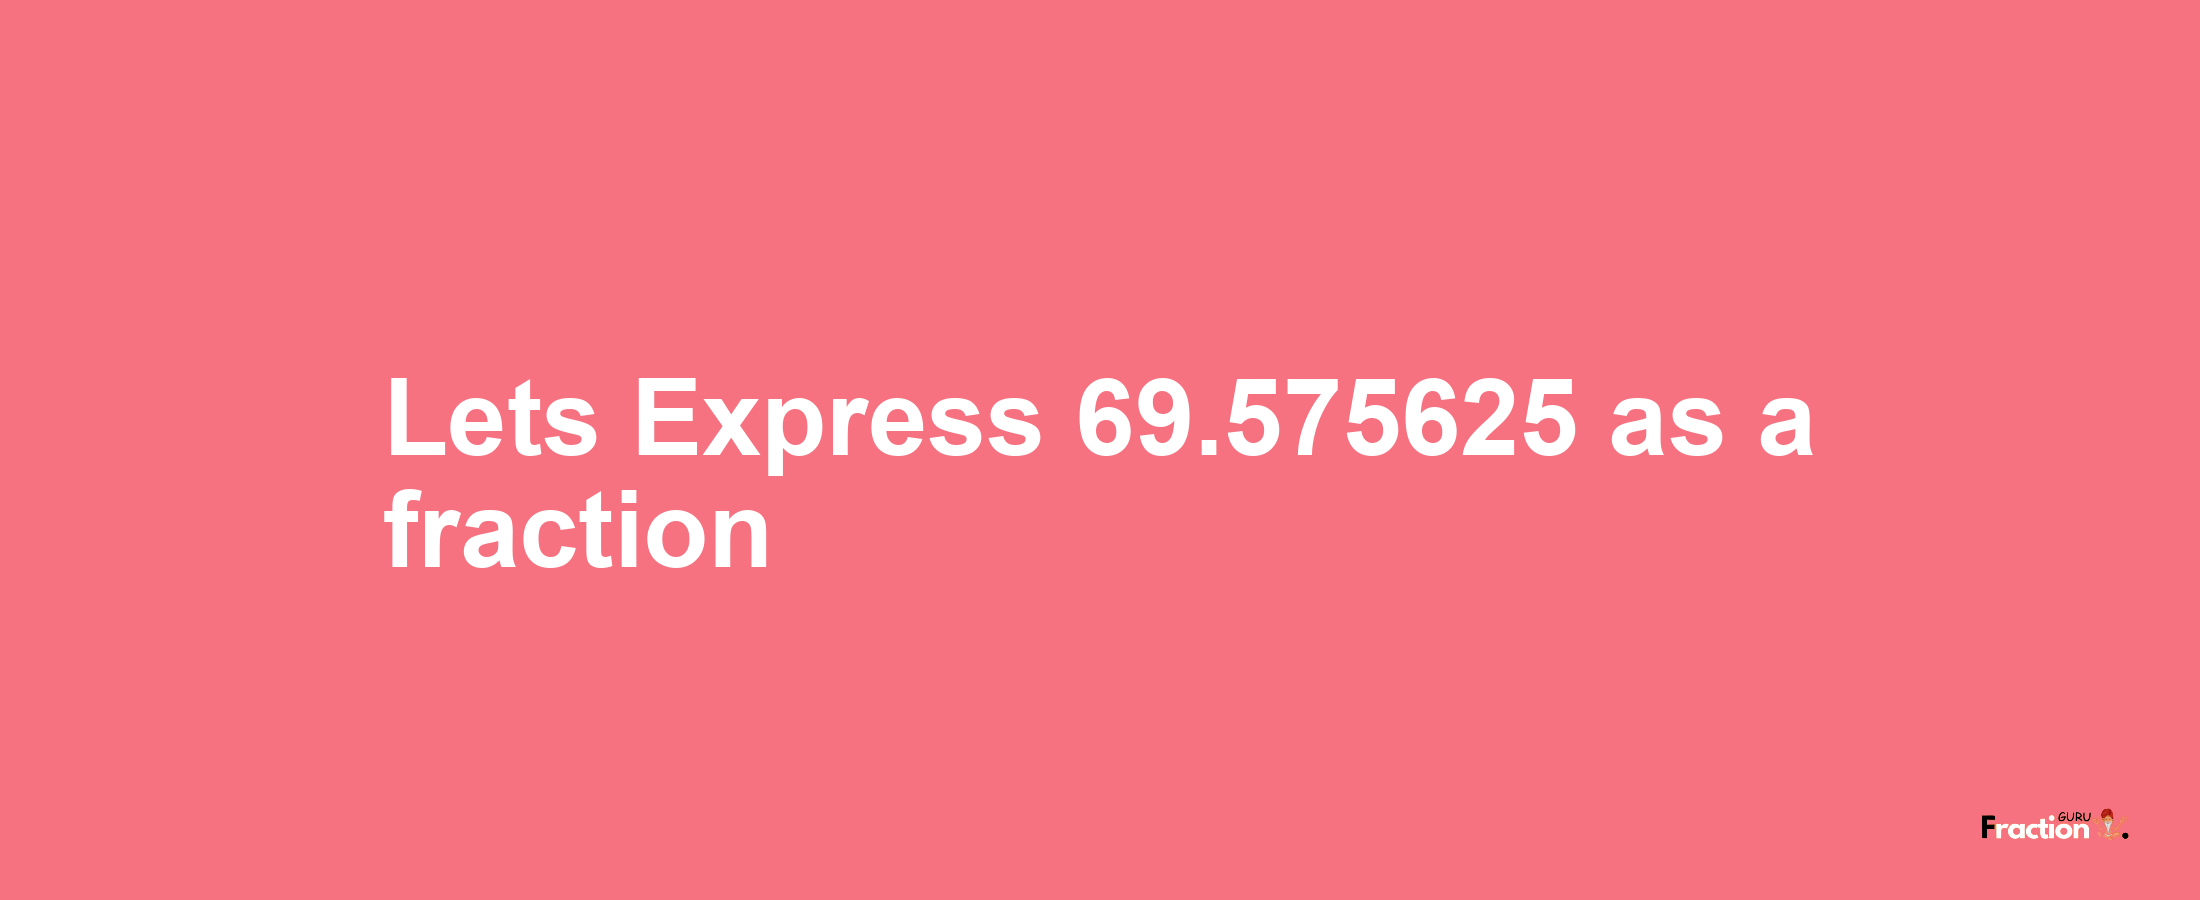 Lets Express 69.575625 as afraction